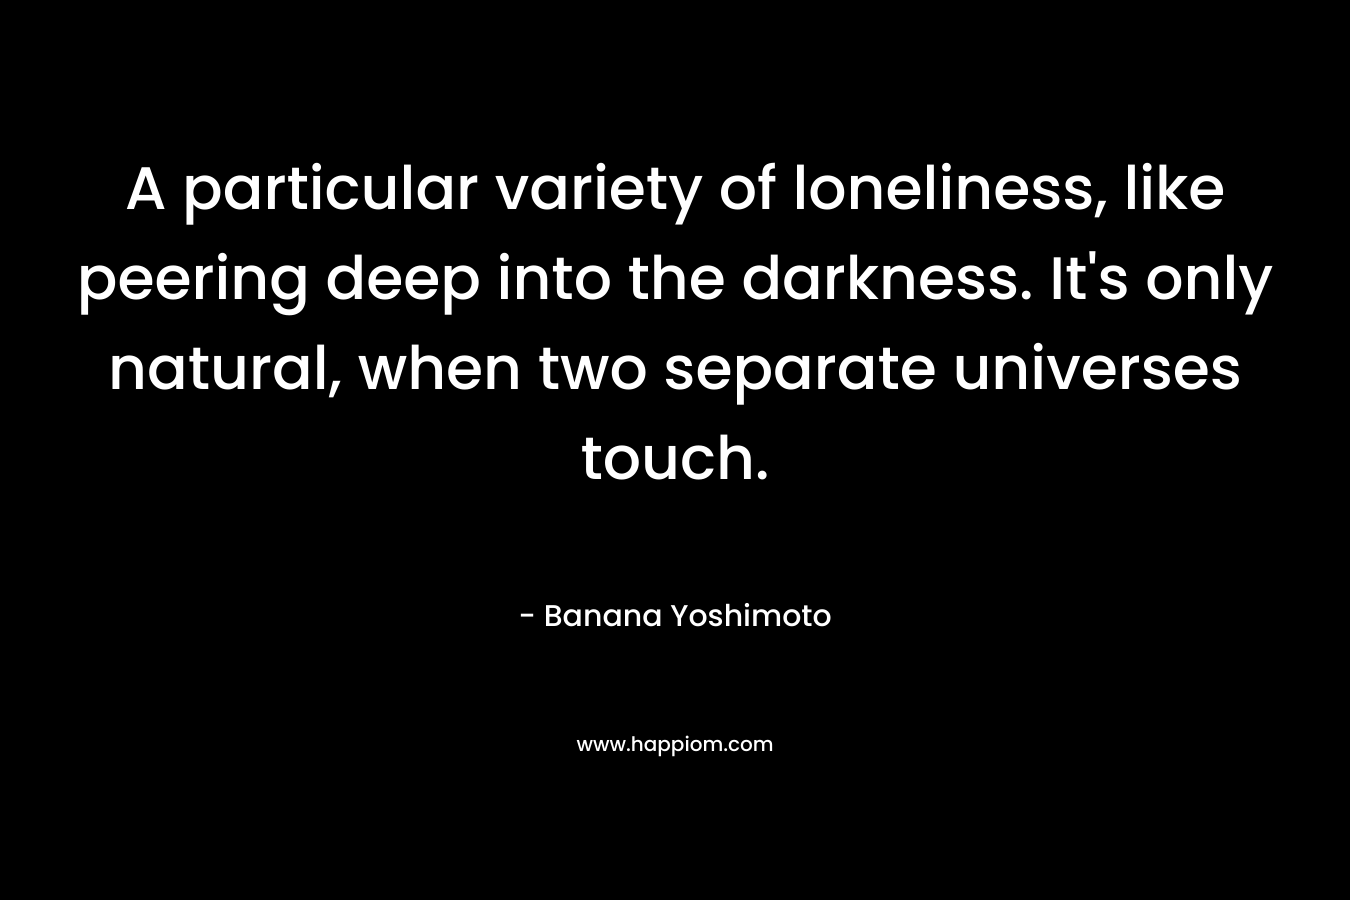 A particular variety of loneliness, like peering deep into the darkness. It’s only natural, when two separate universes touch. – Banana Yoshimoto